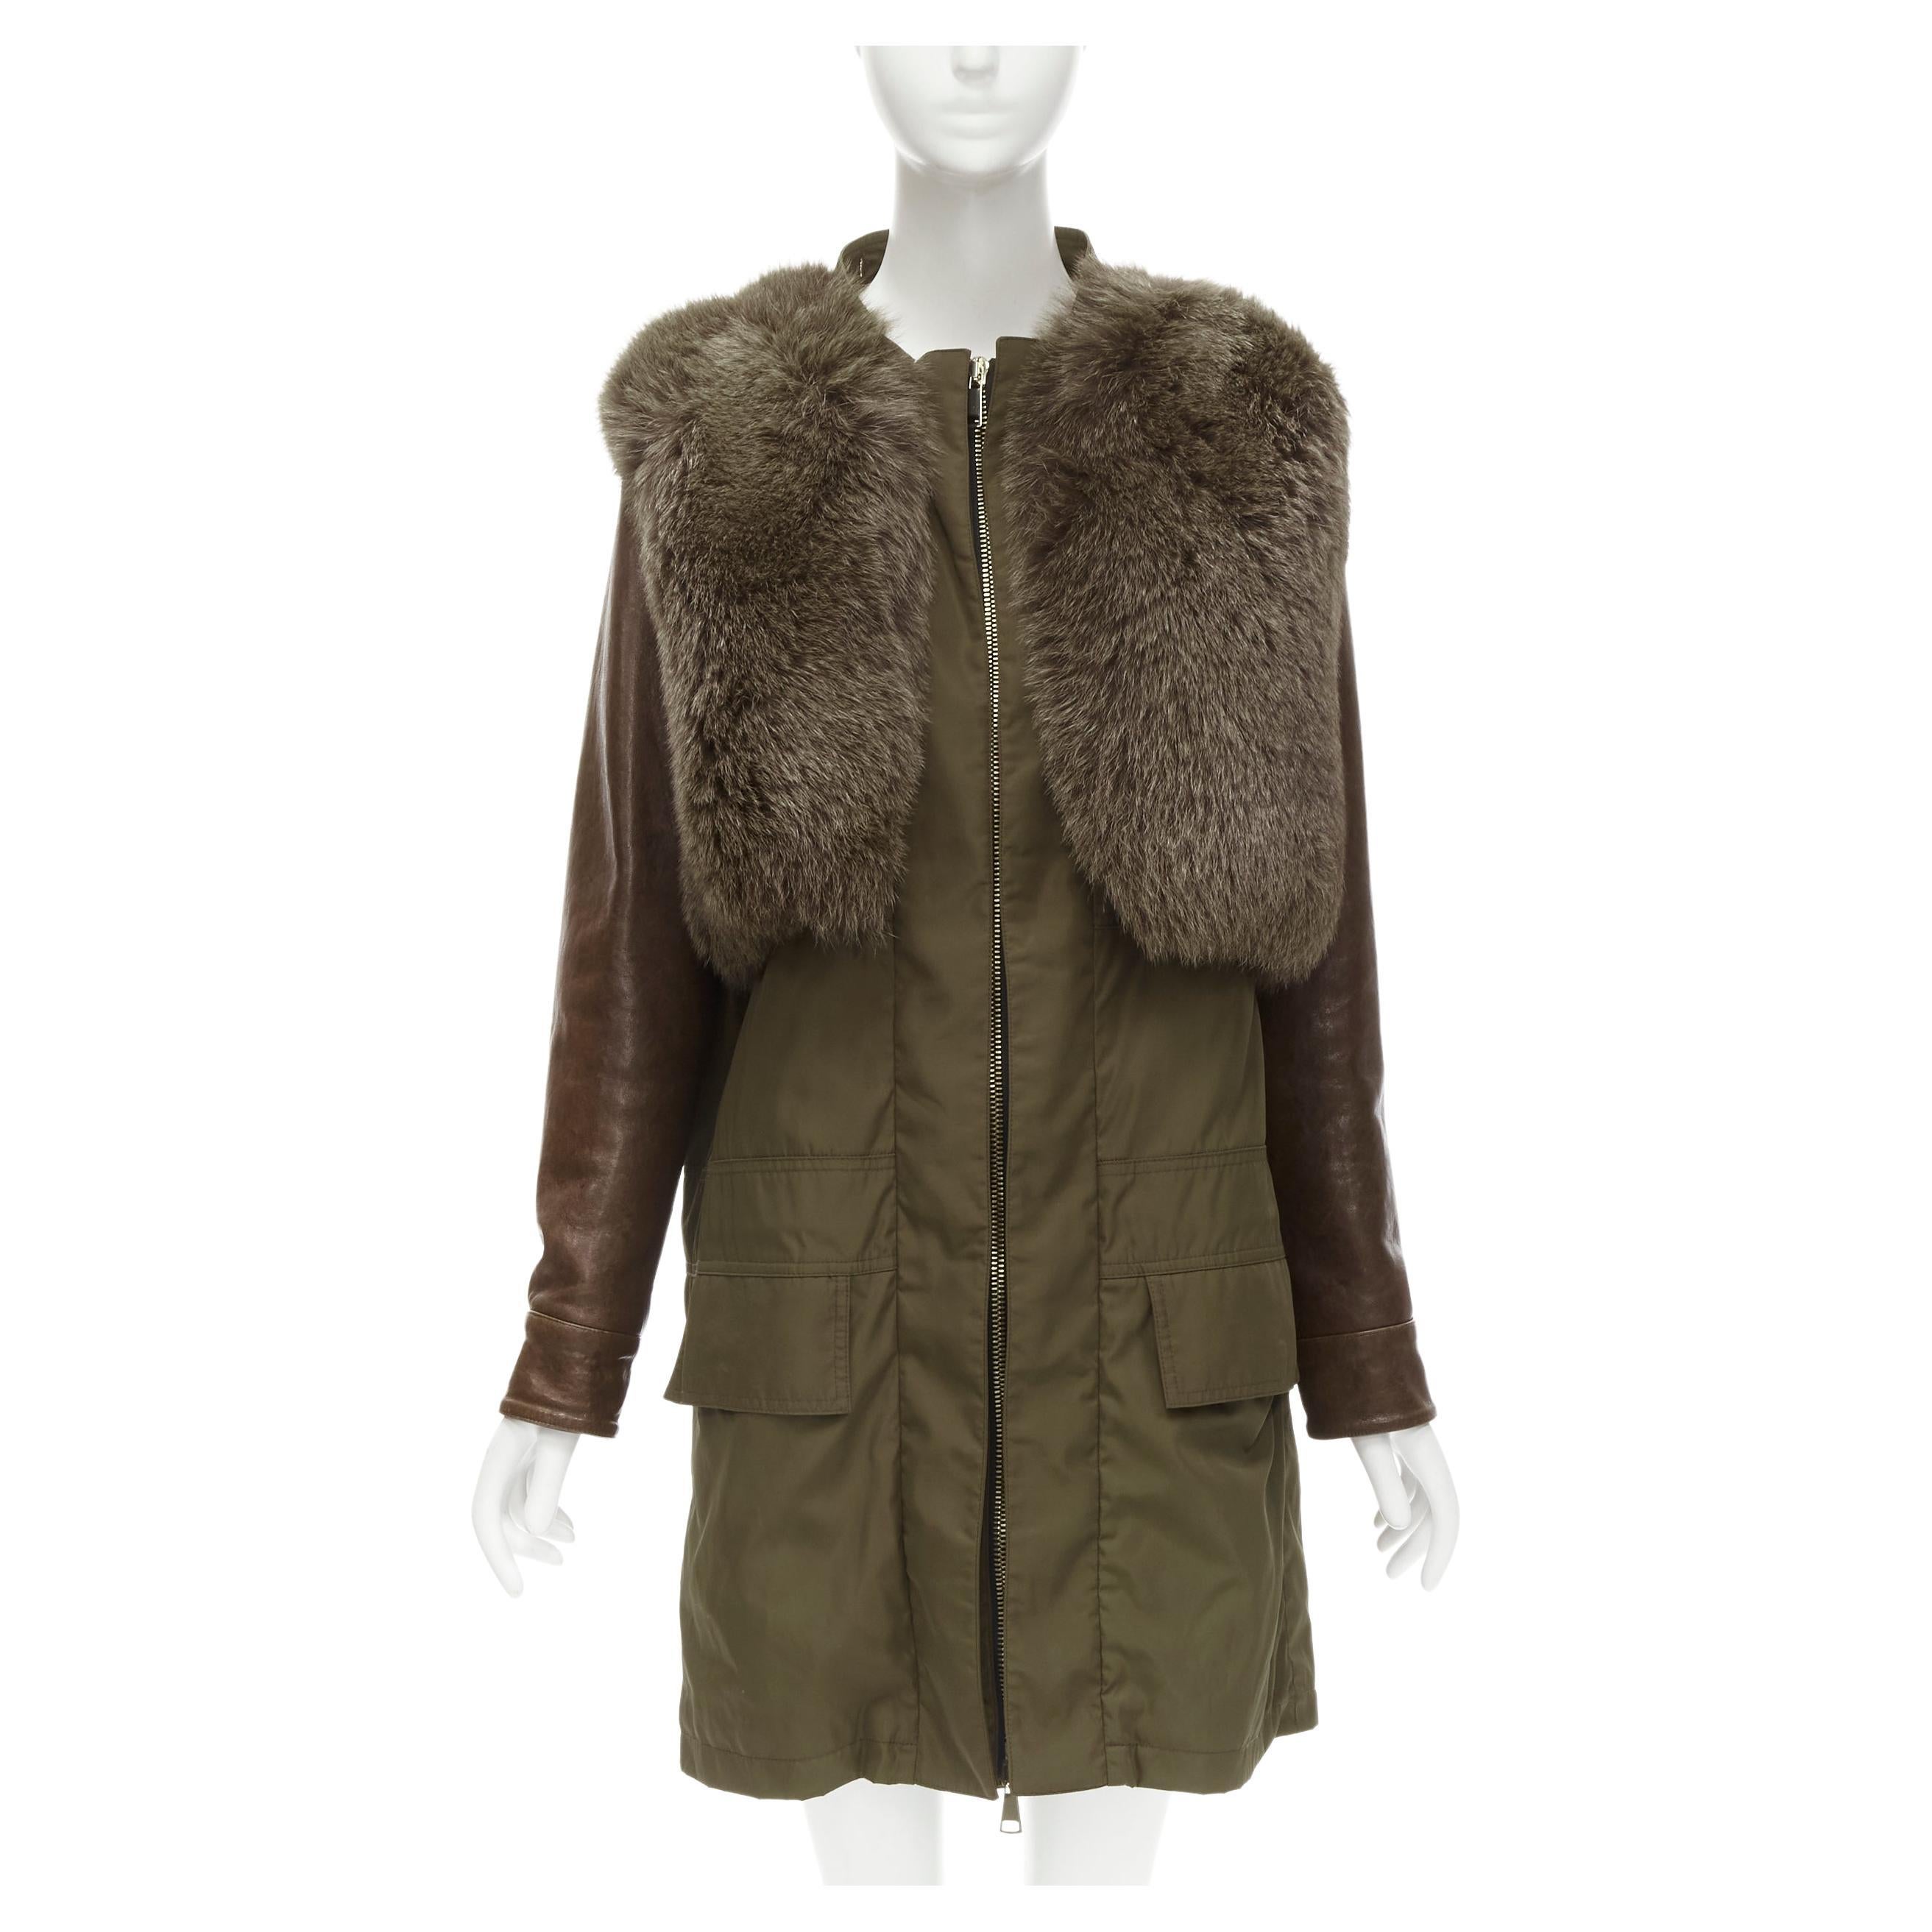 GIVENCHY Riccardo Tisci green leather sleeve fox fur anorak coat FR34 XS For Sale